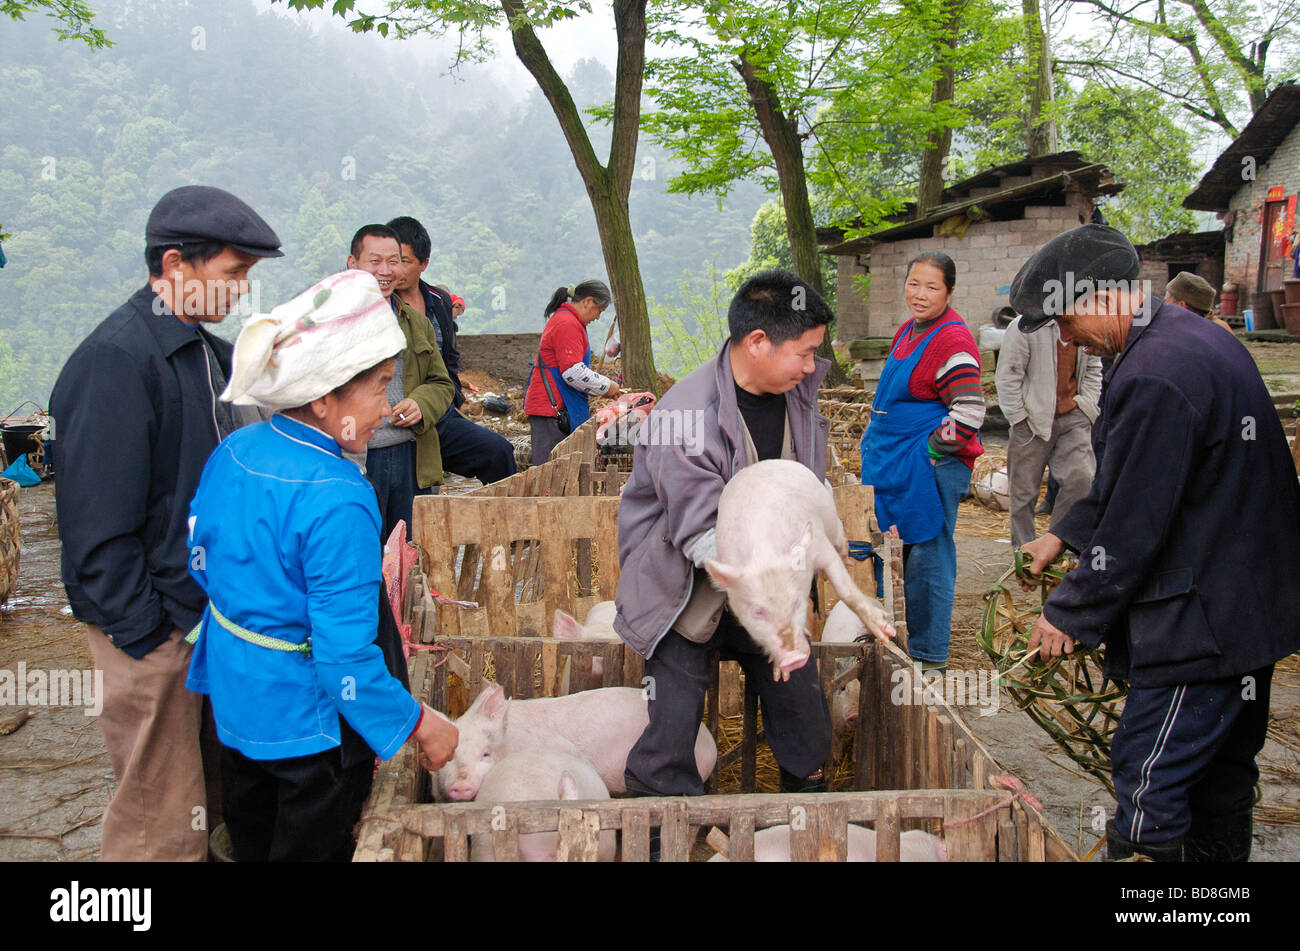 A bought pig being transferred into basket for transportation Guizhou Province China Stock Photo